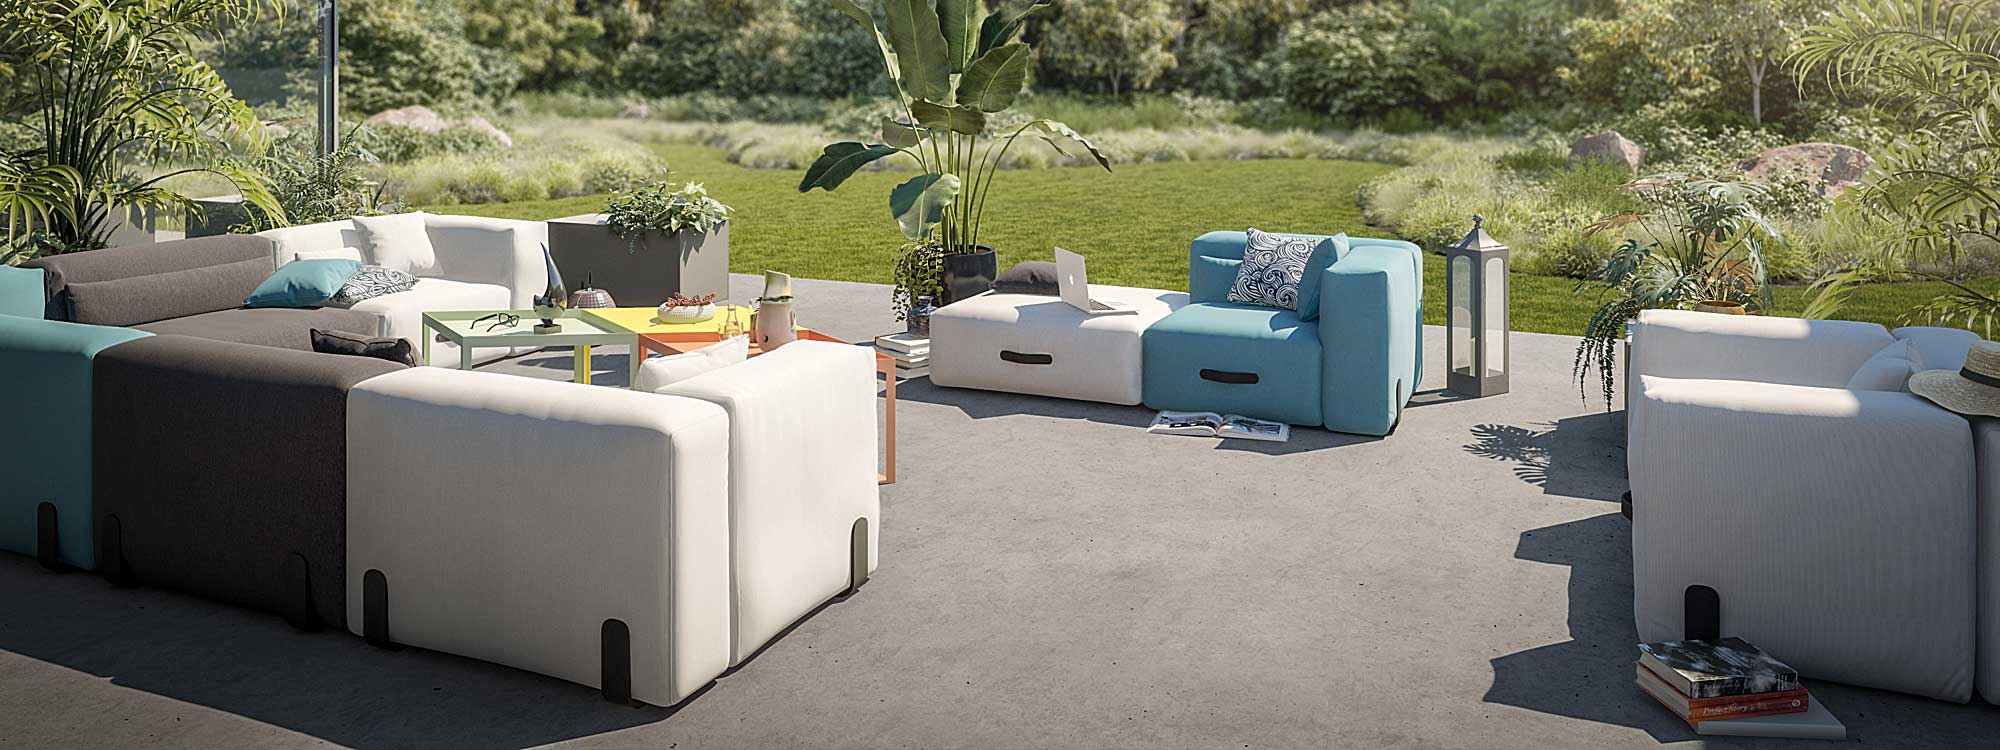 Miami upholstered garden sofa is available in Grey, Anthracite and Blue Sunbrella fabric